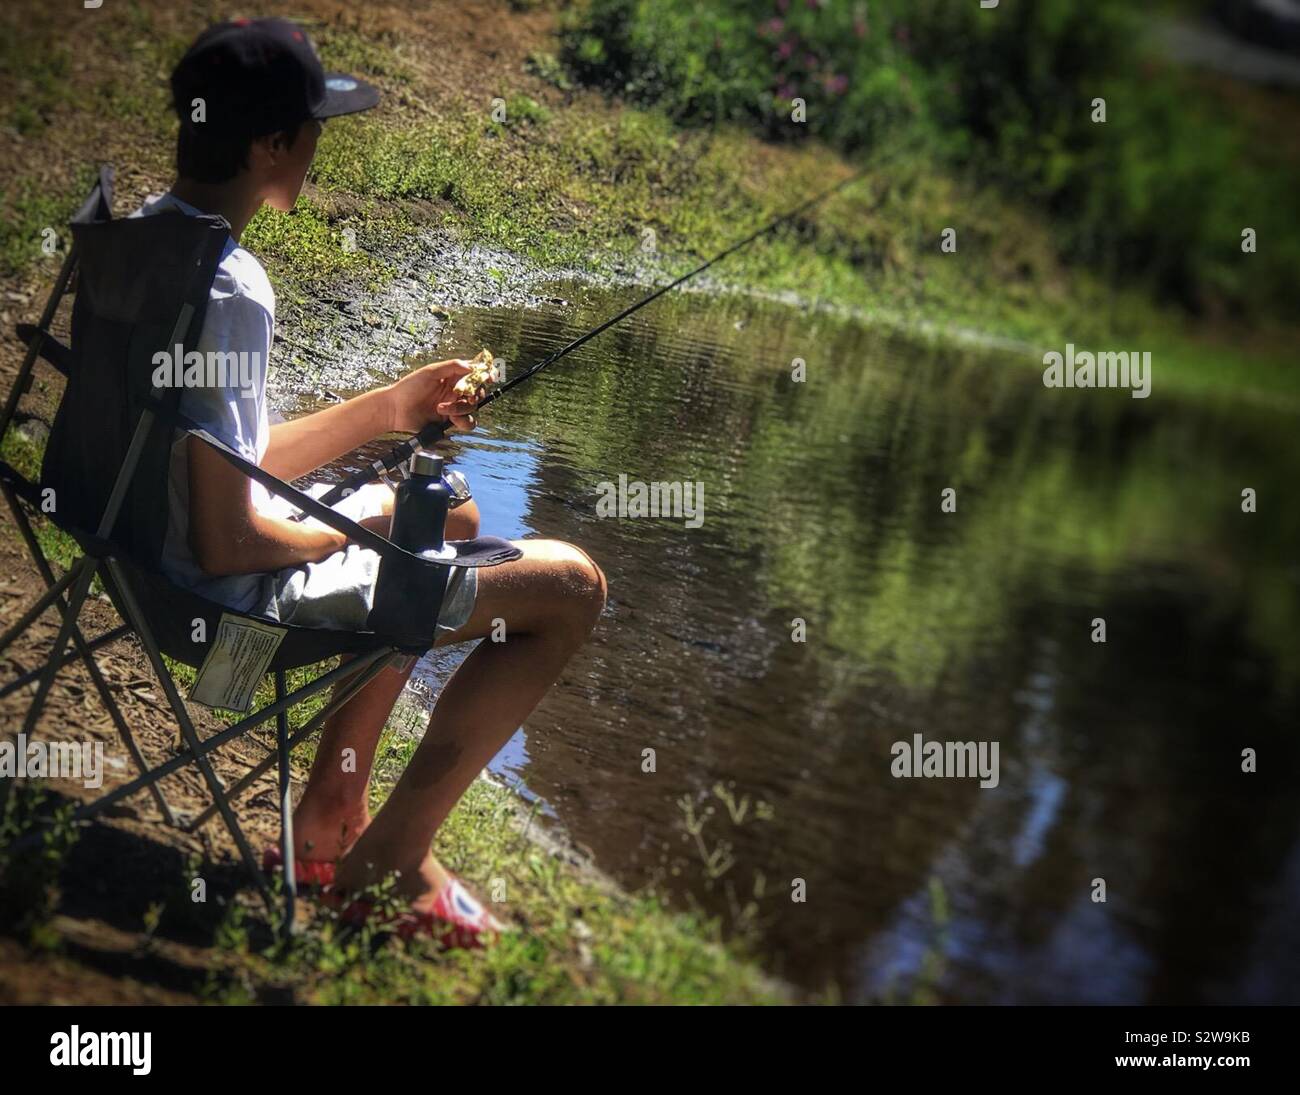 https://c8.alamy.com/comp/S2W9KB/teenage-boy-sitting-in-a-chair-while-fishing-along-the-shoreline-S2W9KB.jpg